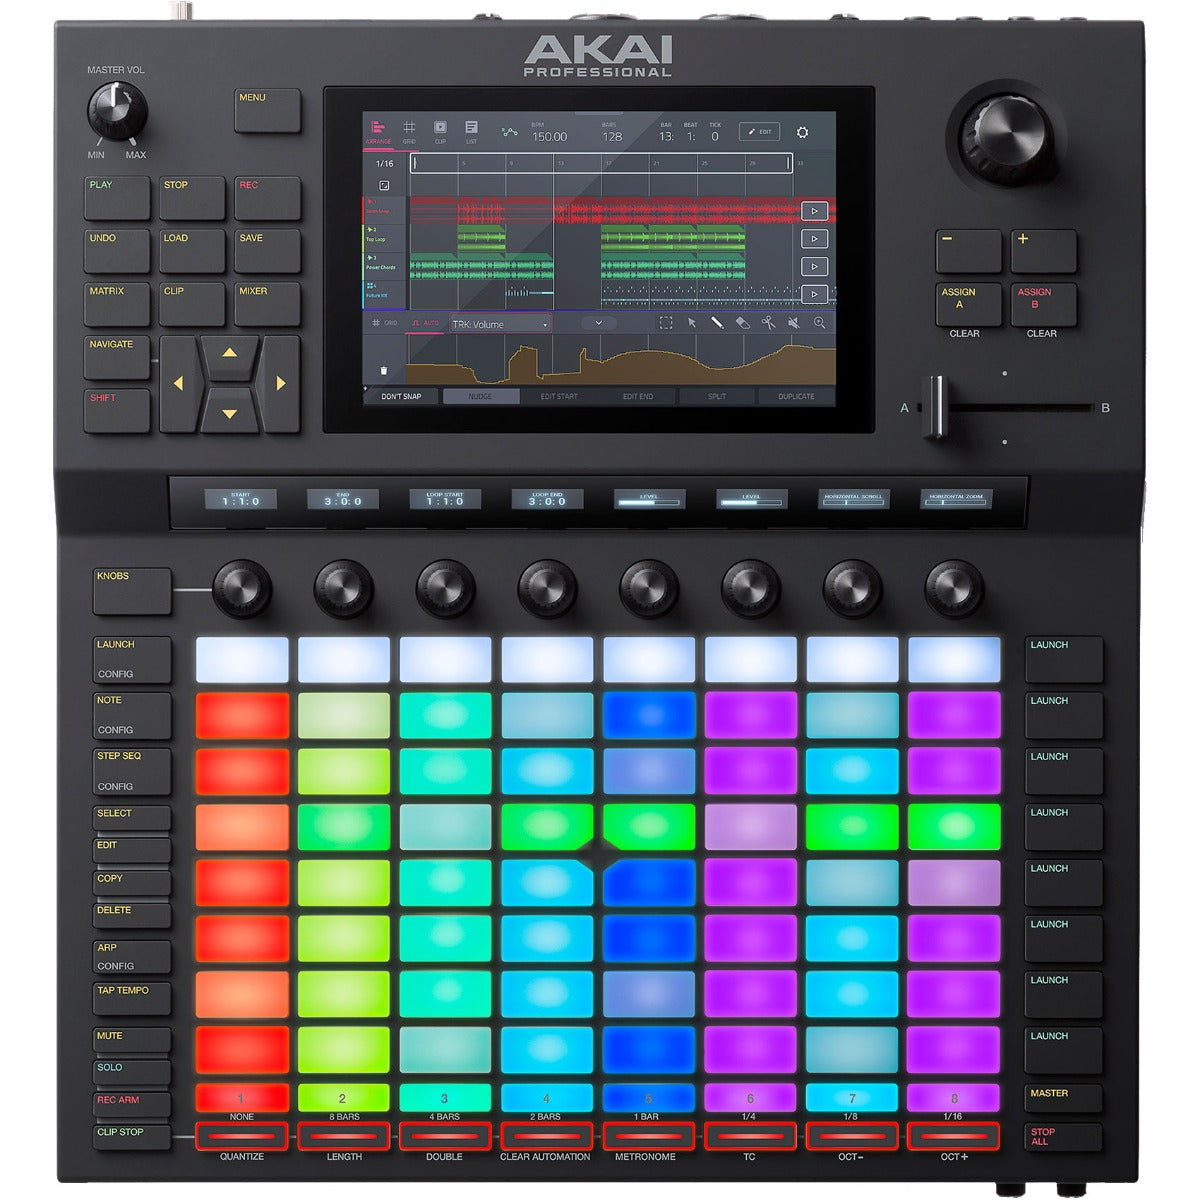 Top view of Akai Professional Force Production/Performance System